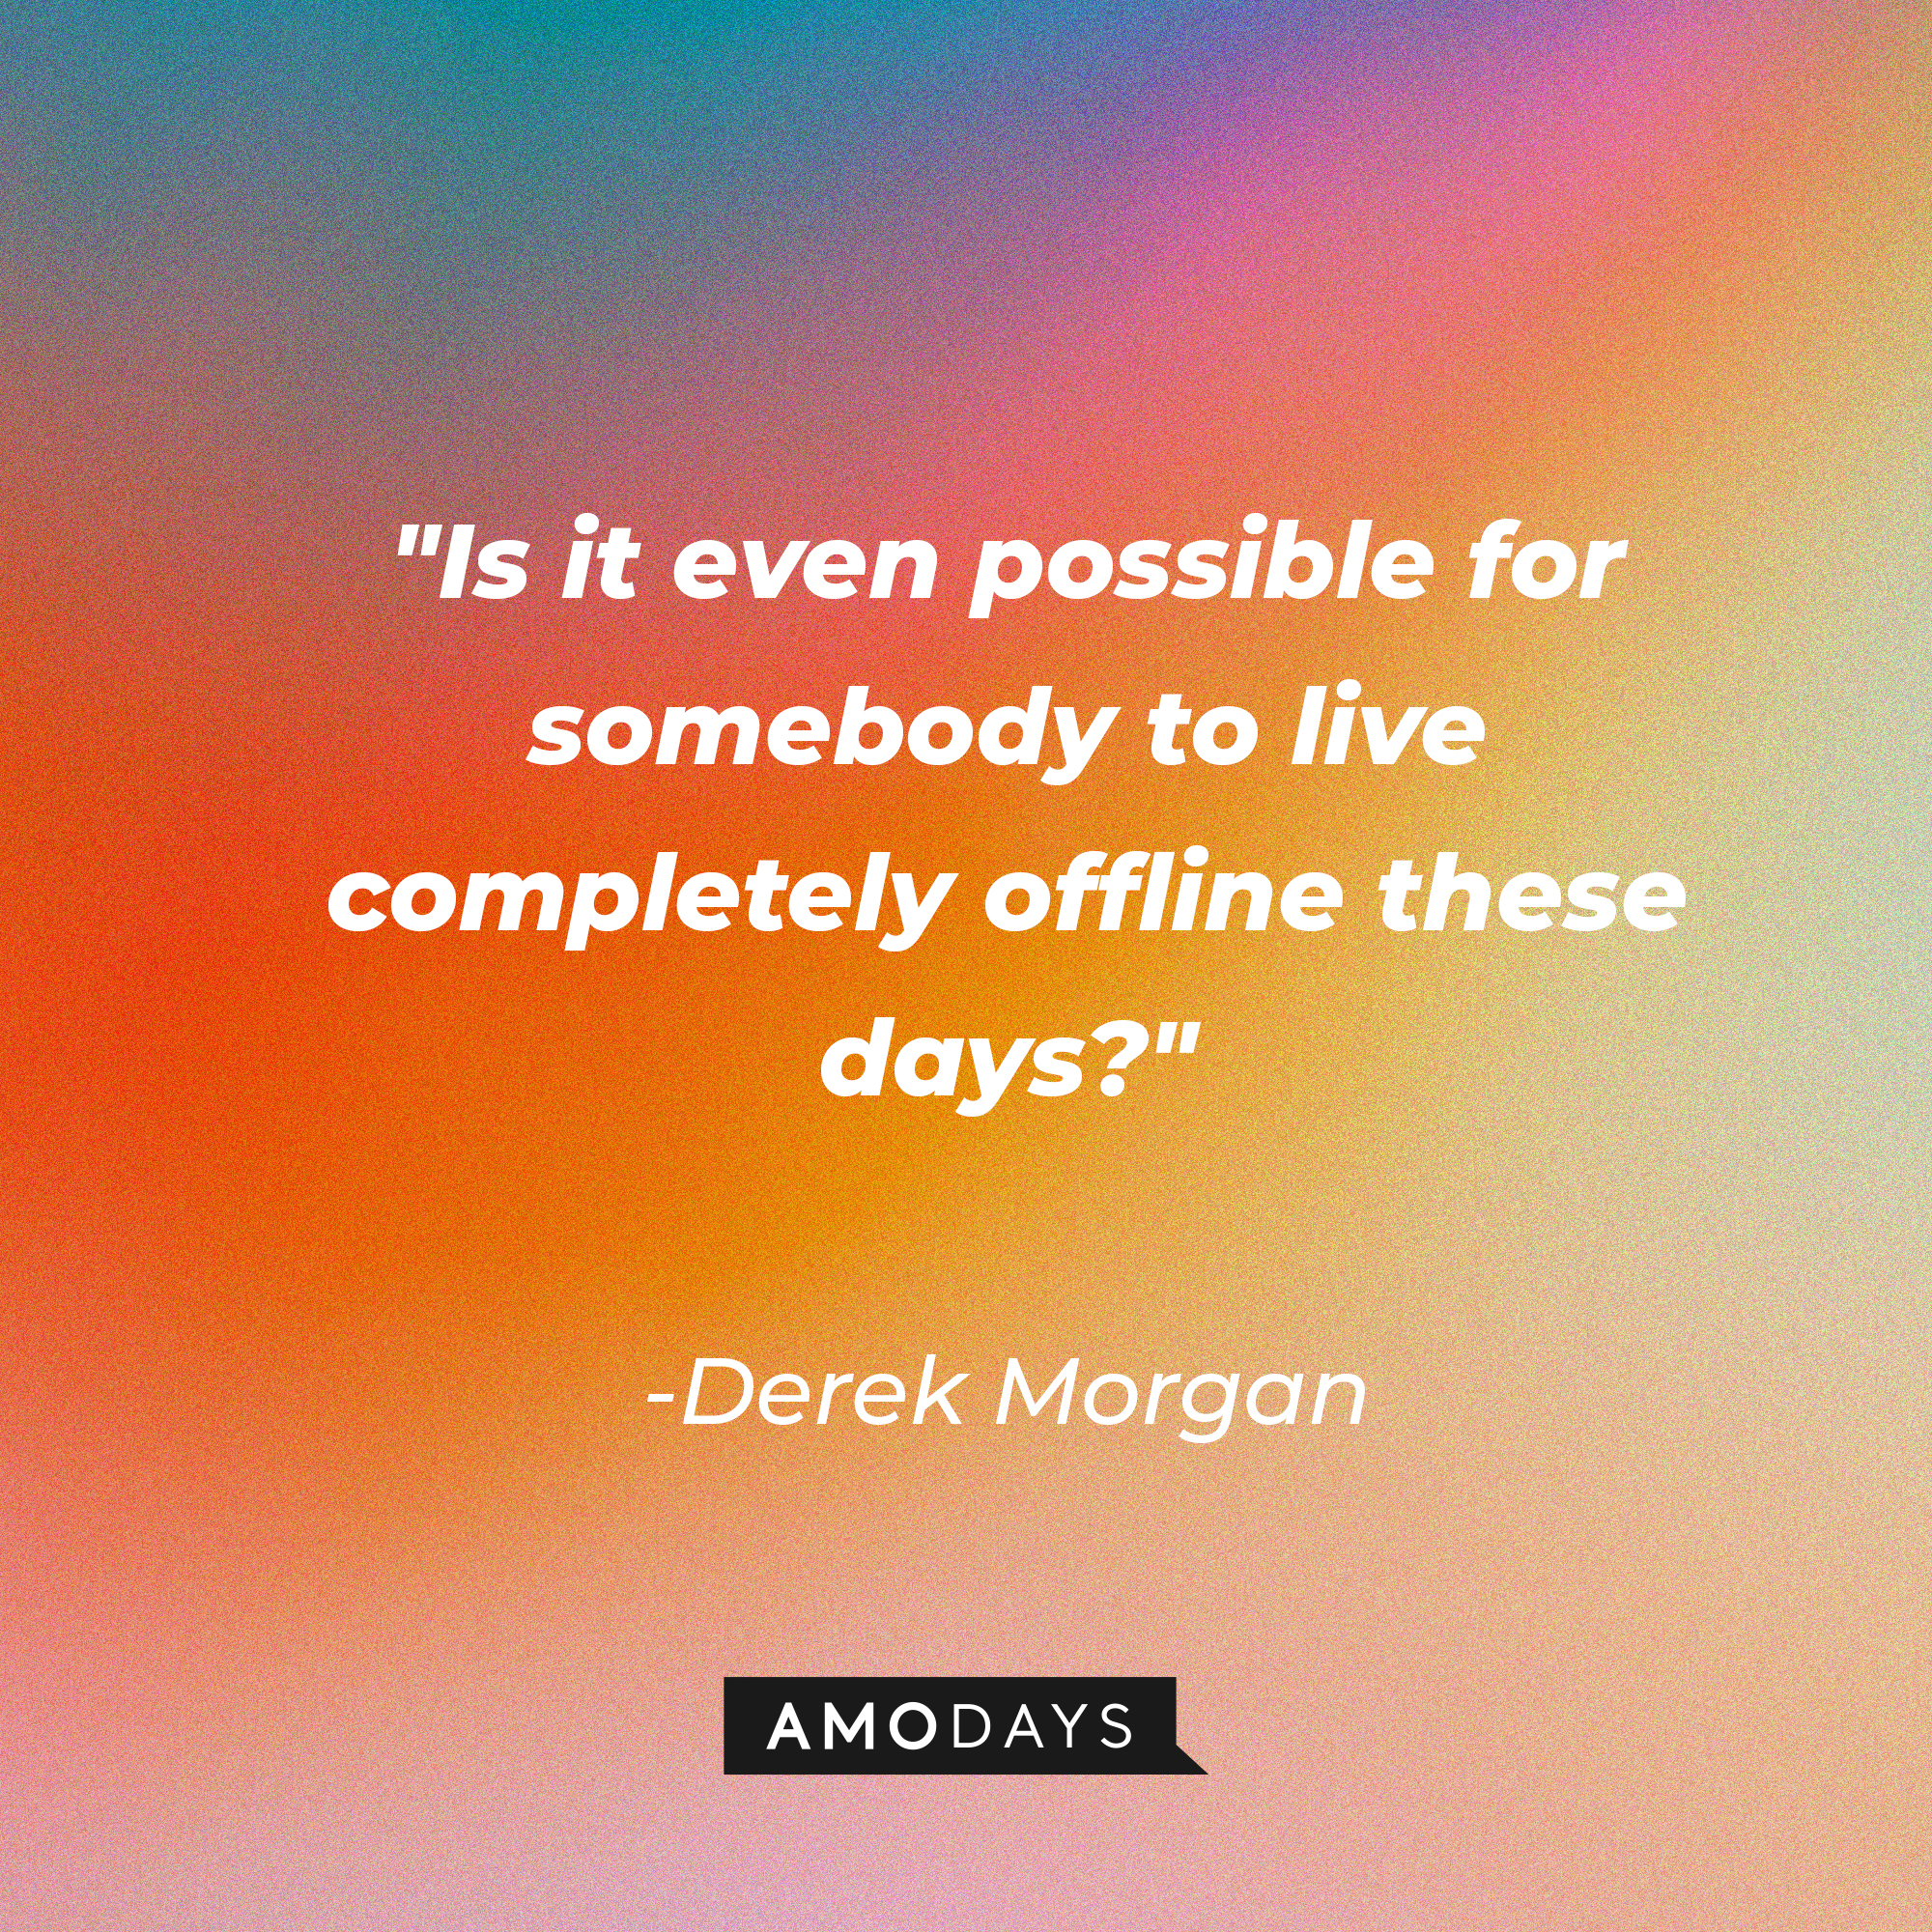 Derek Morgan's quote: "Is it even possible for somebody to live completely offline these days?" | Source: AmoDays